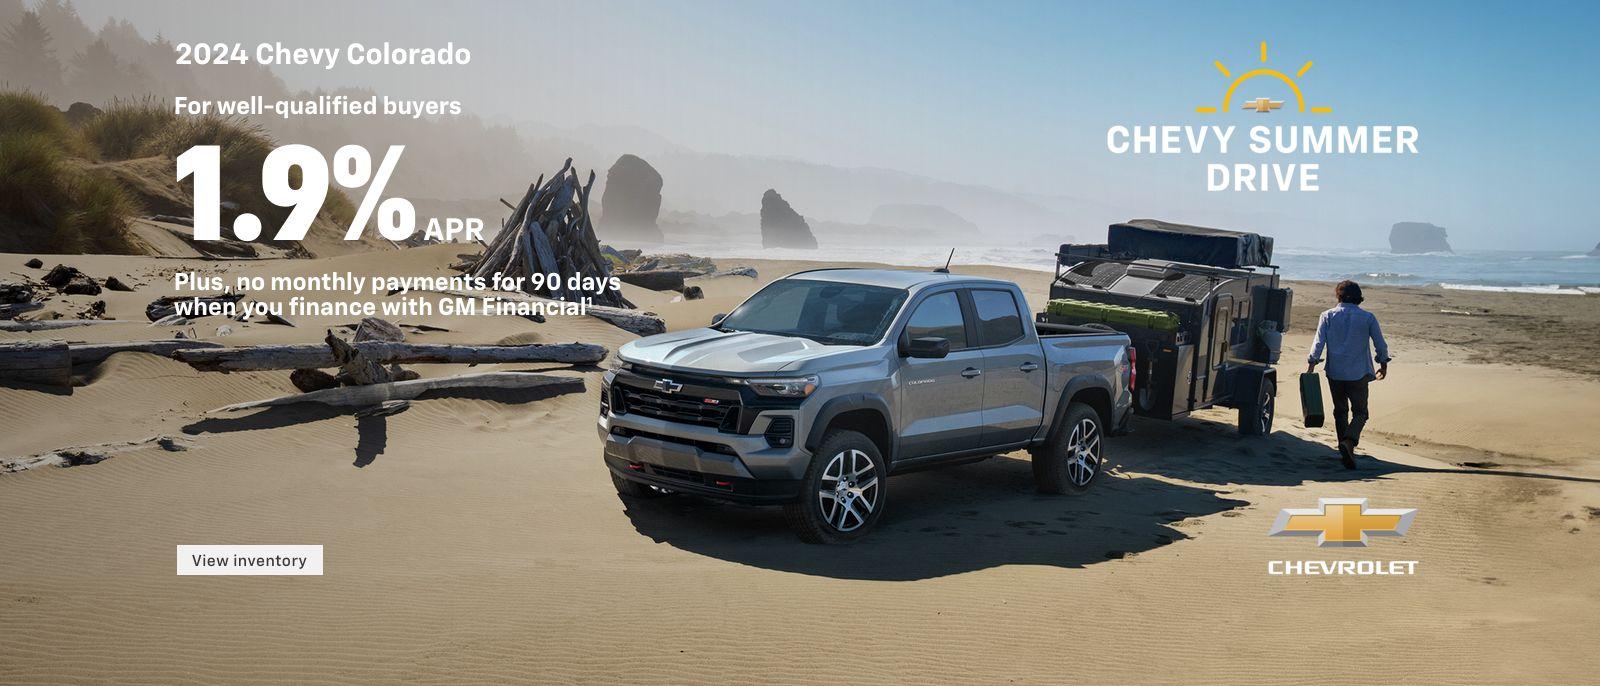 2024 Chevy Colorado. Made for more. For well-qualified buyers 1.9% APR + No monthly payments for 90 days when you finance with GM Financial.